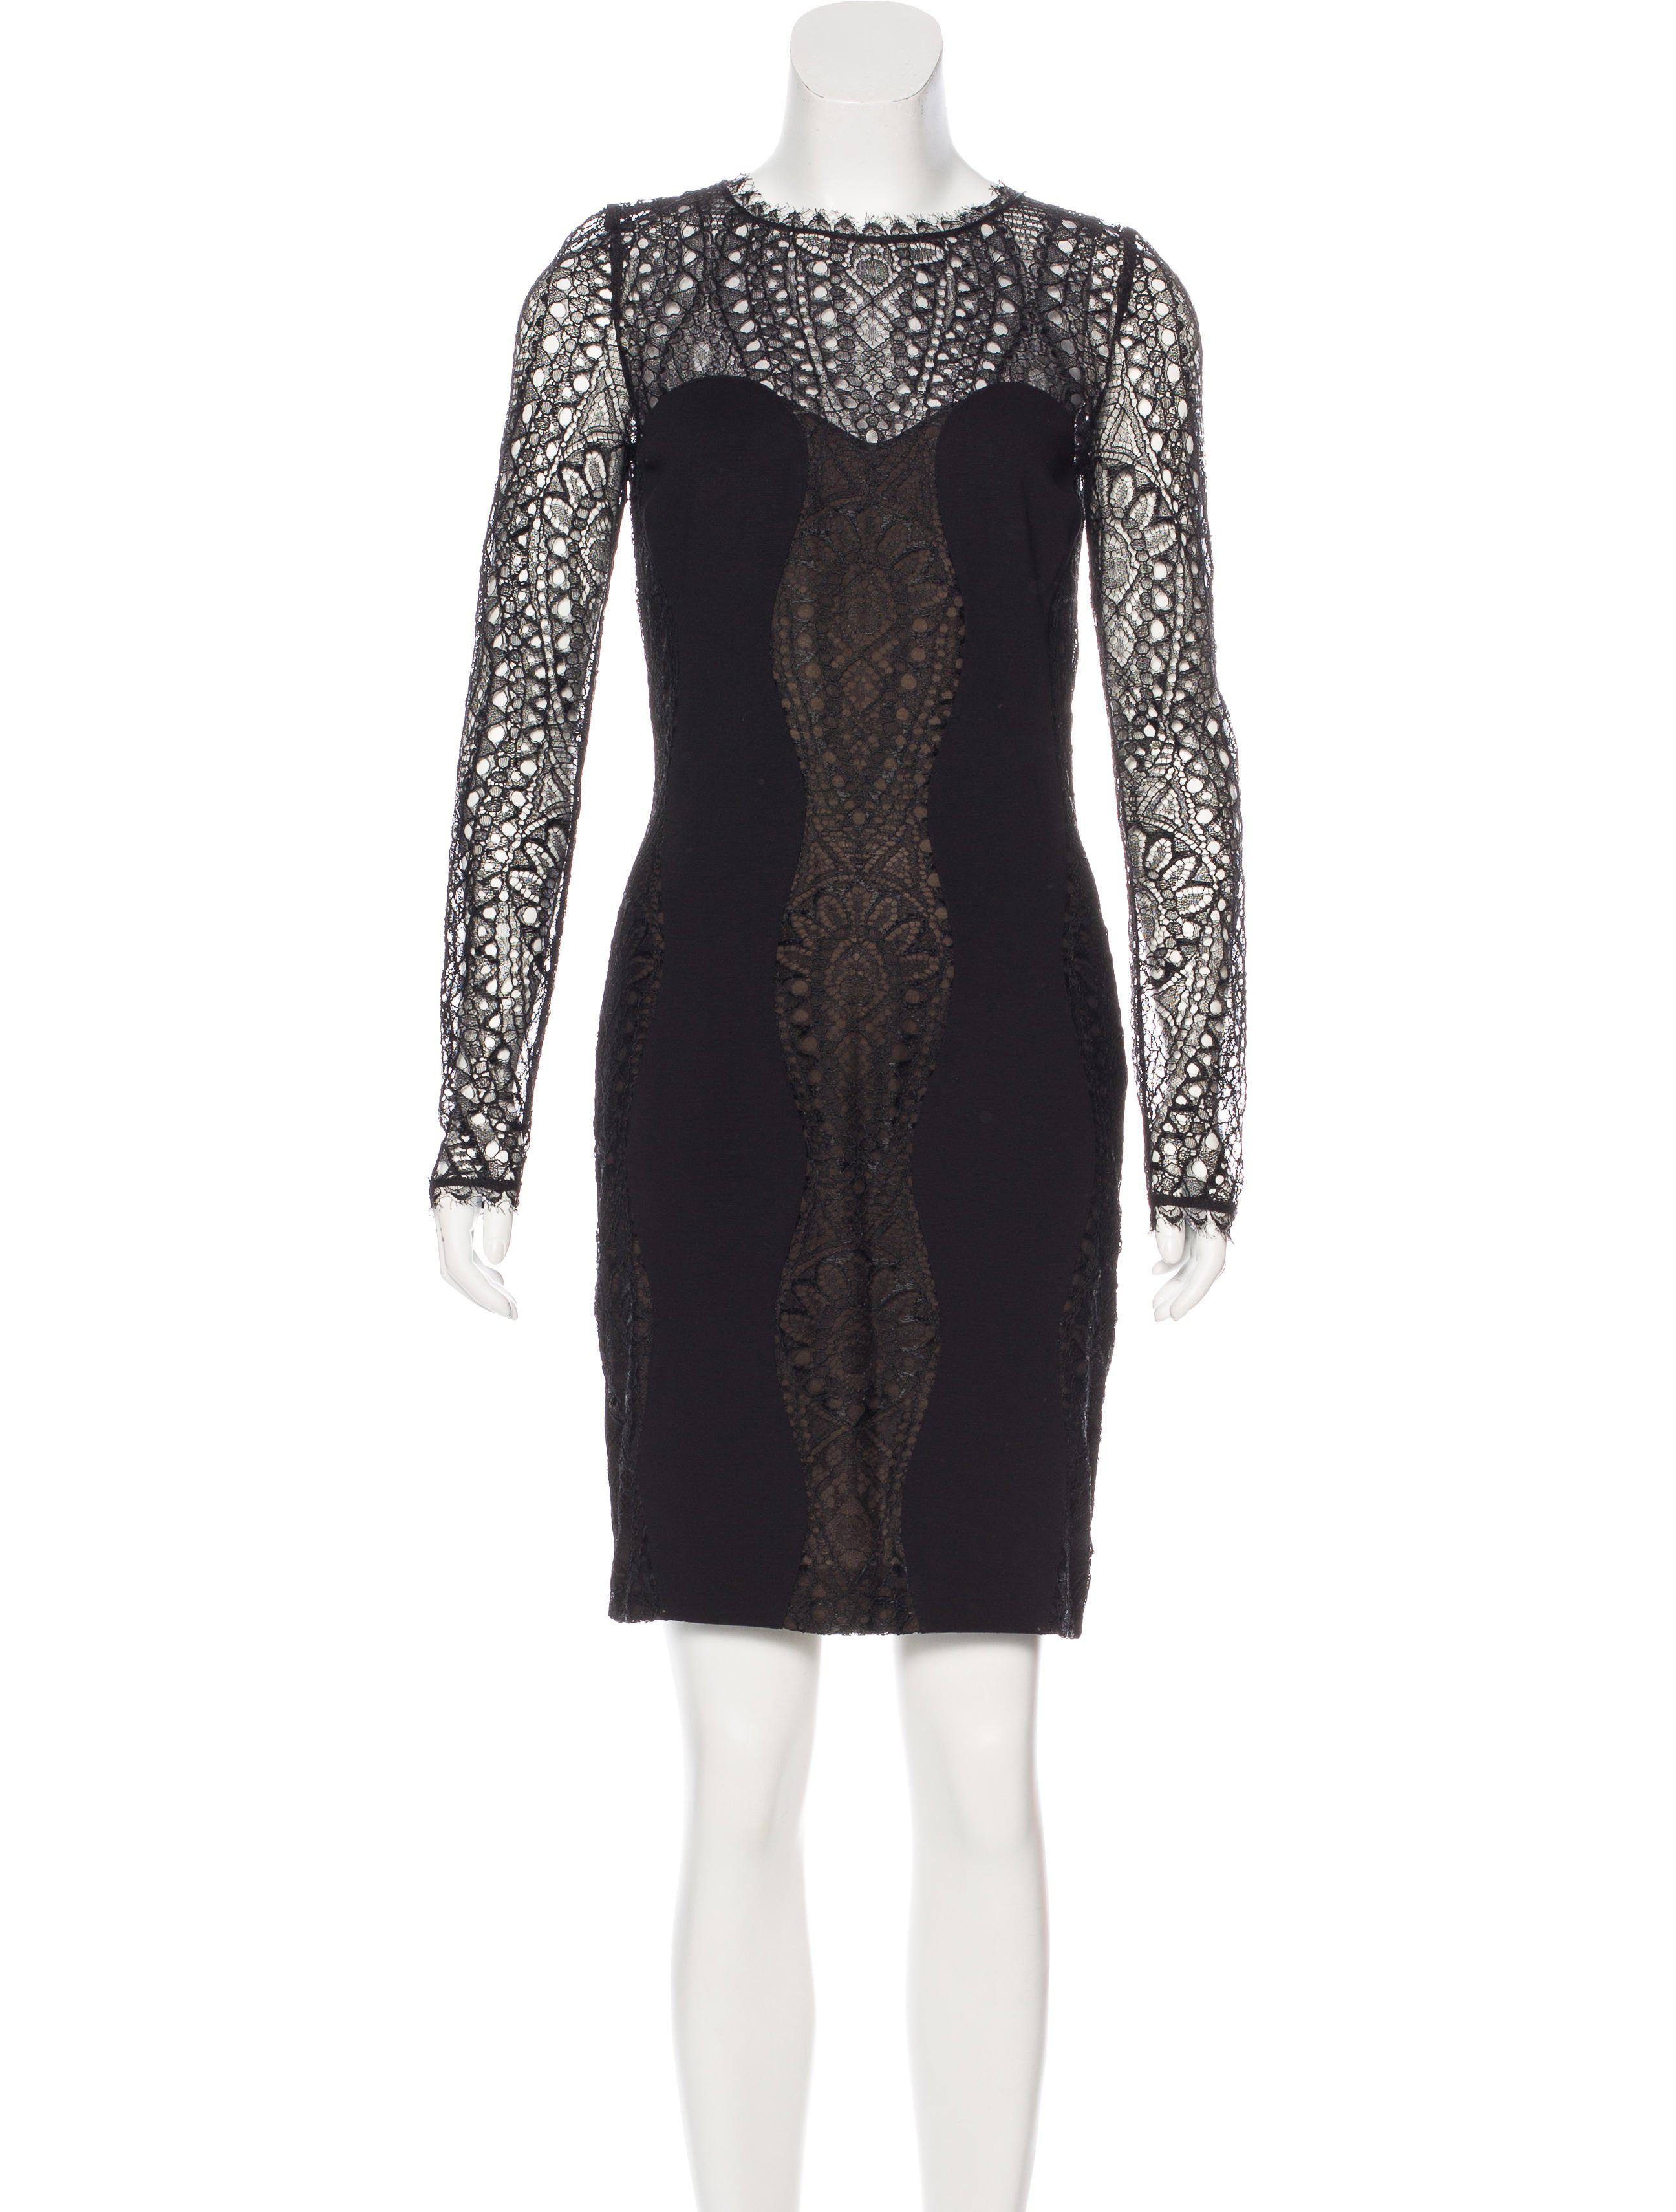 Emilio pucci Lace-trimmed Bodycon Dress in Black | Lyst